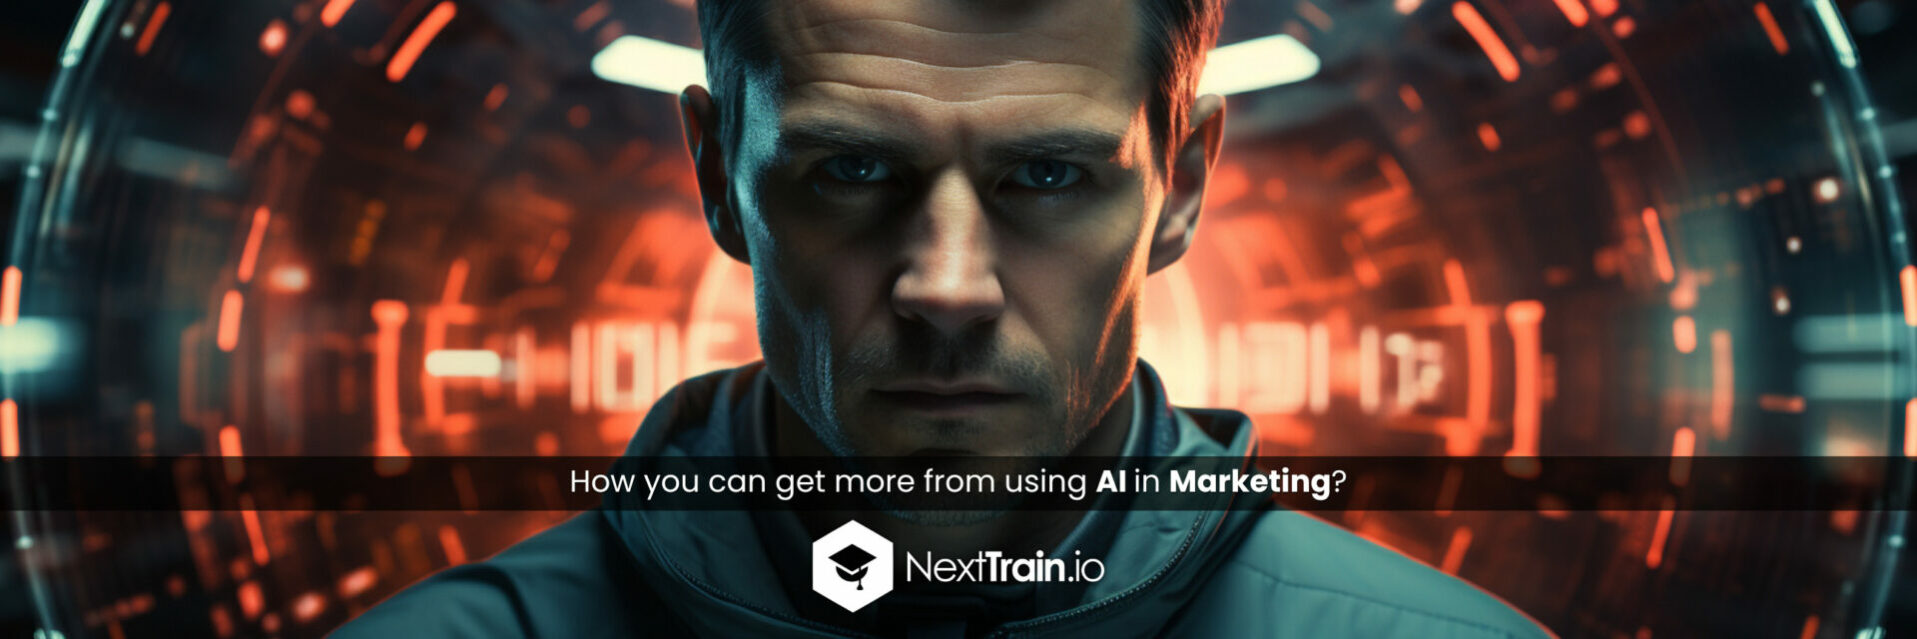 How you can get more from using AI in Marketing?